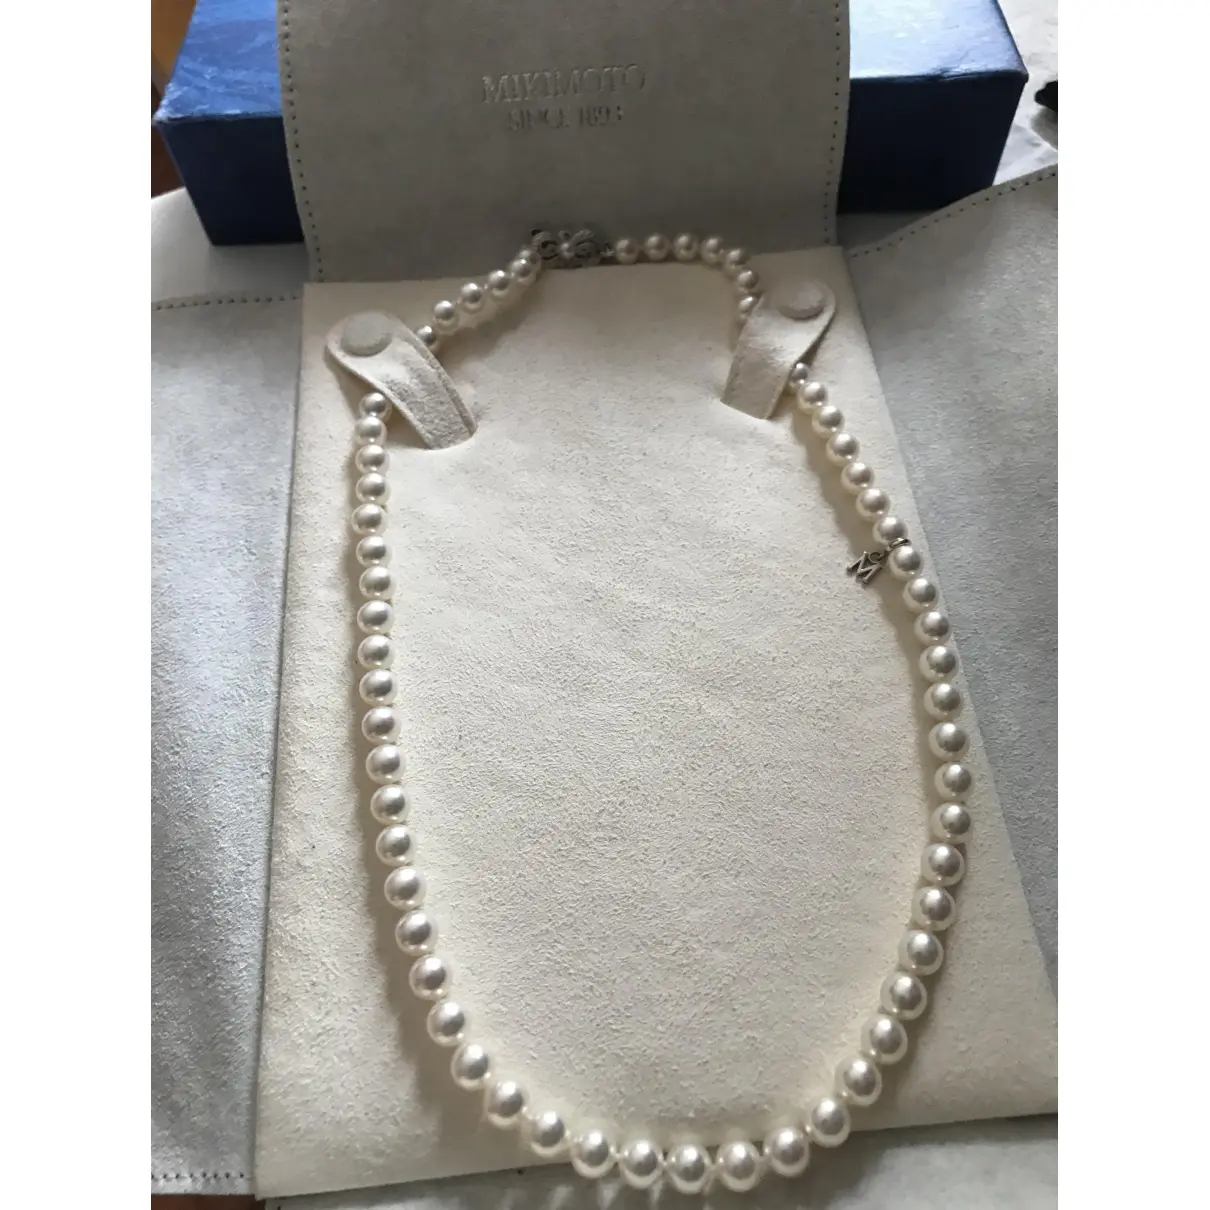 Buy Mikimoto Pearl necklace online